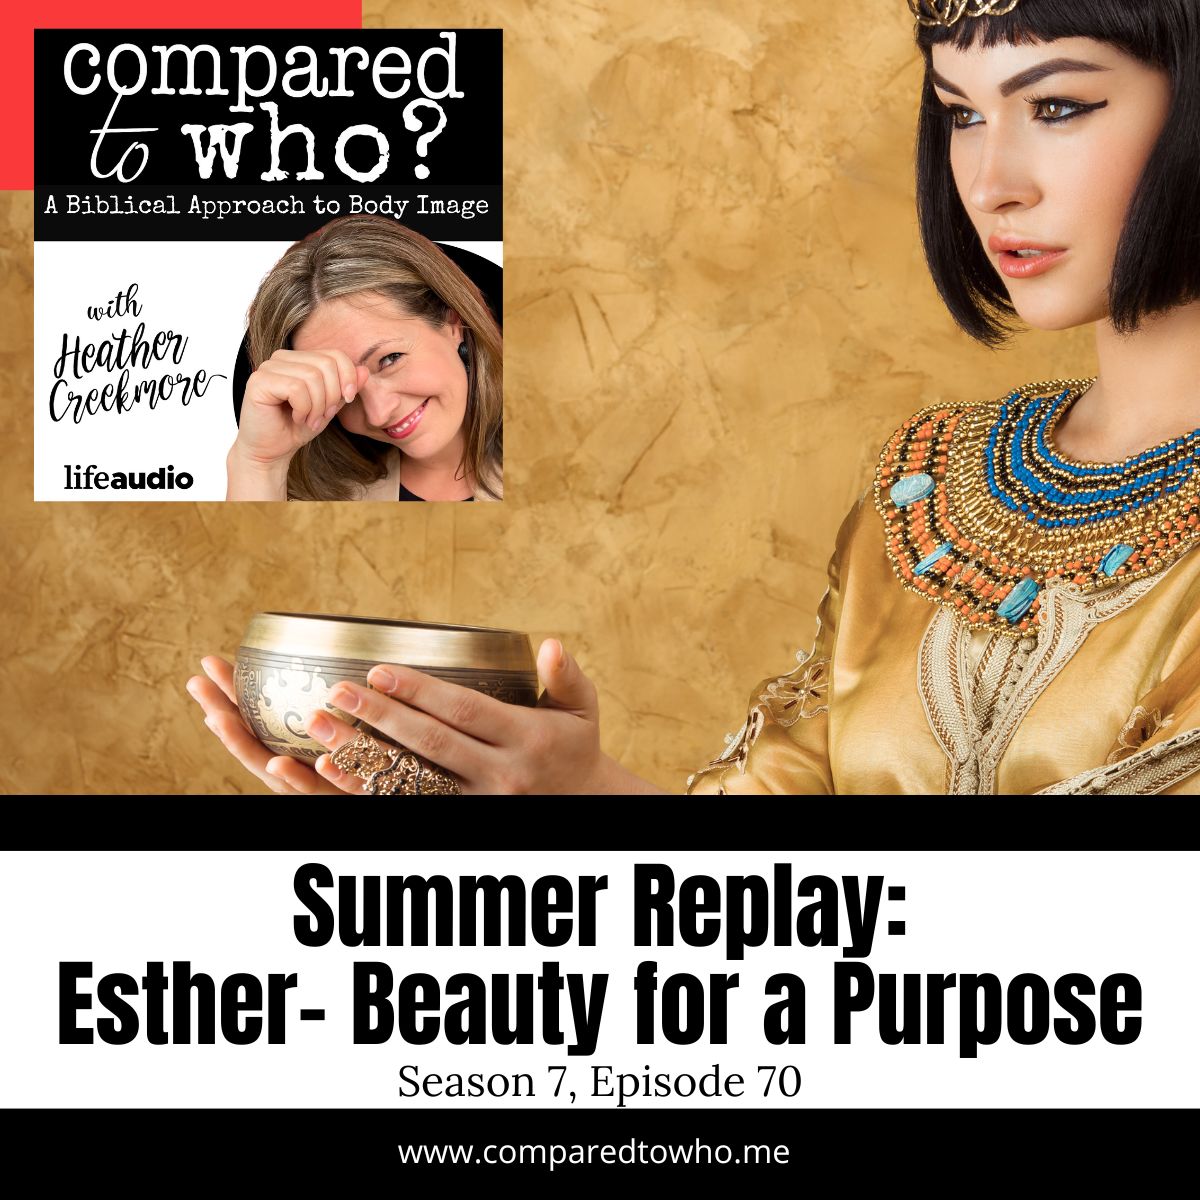 Summer Replay: Let’s Talk About Esther’s Beauty